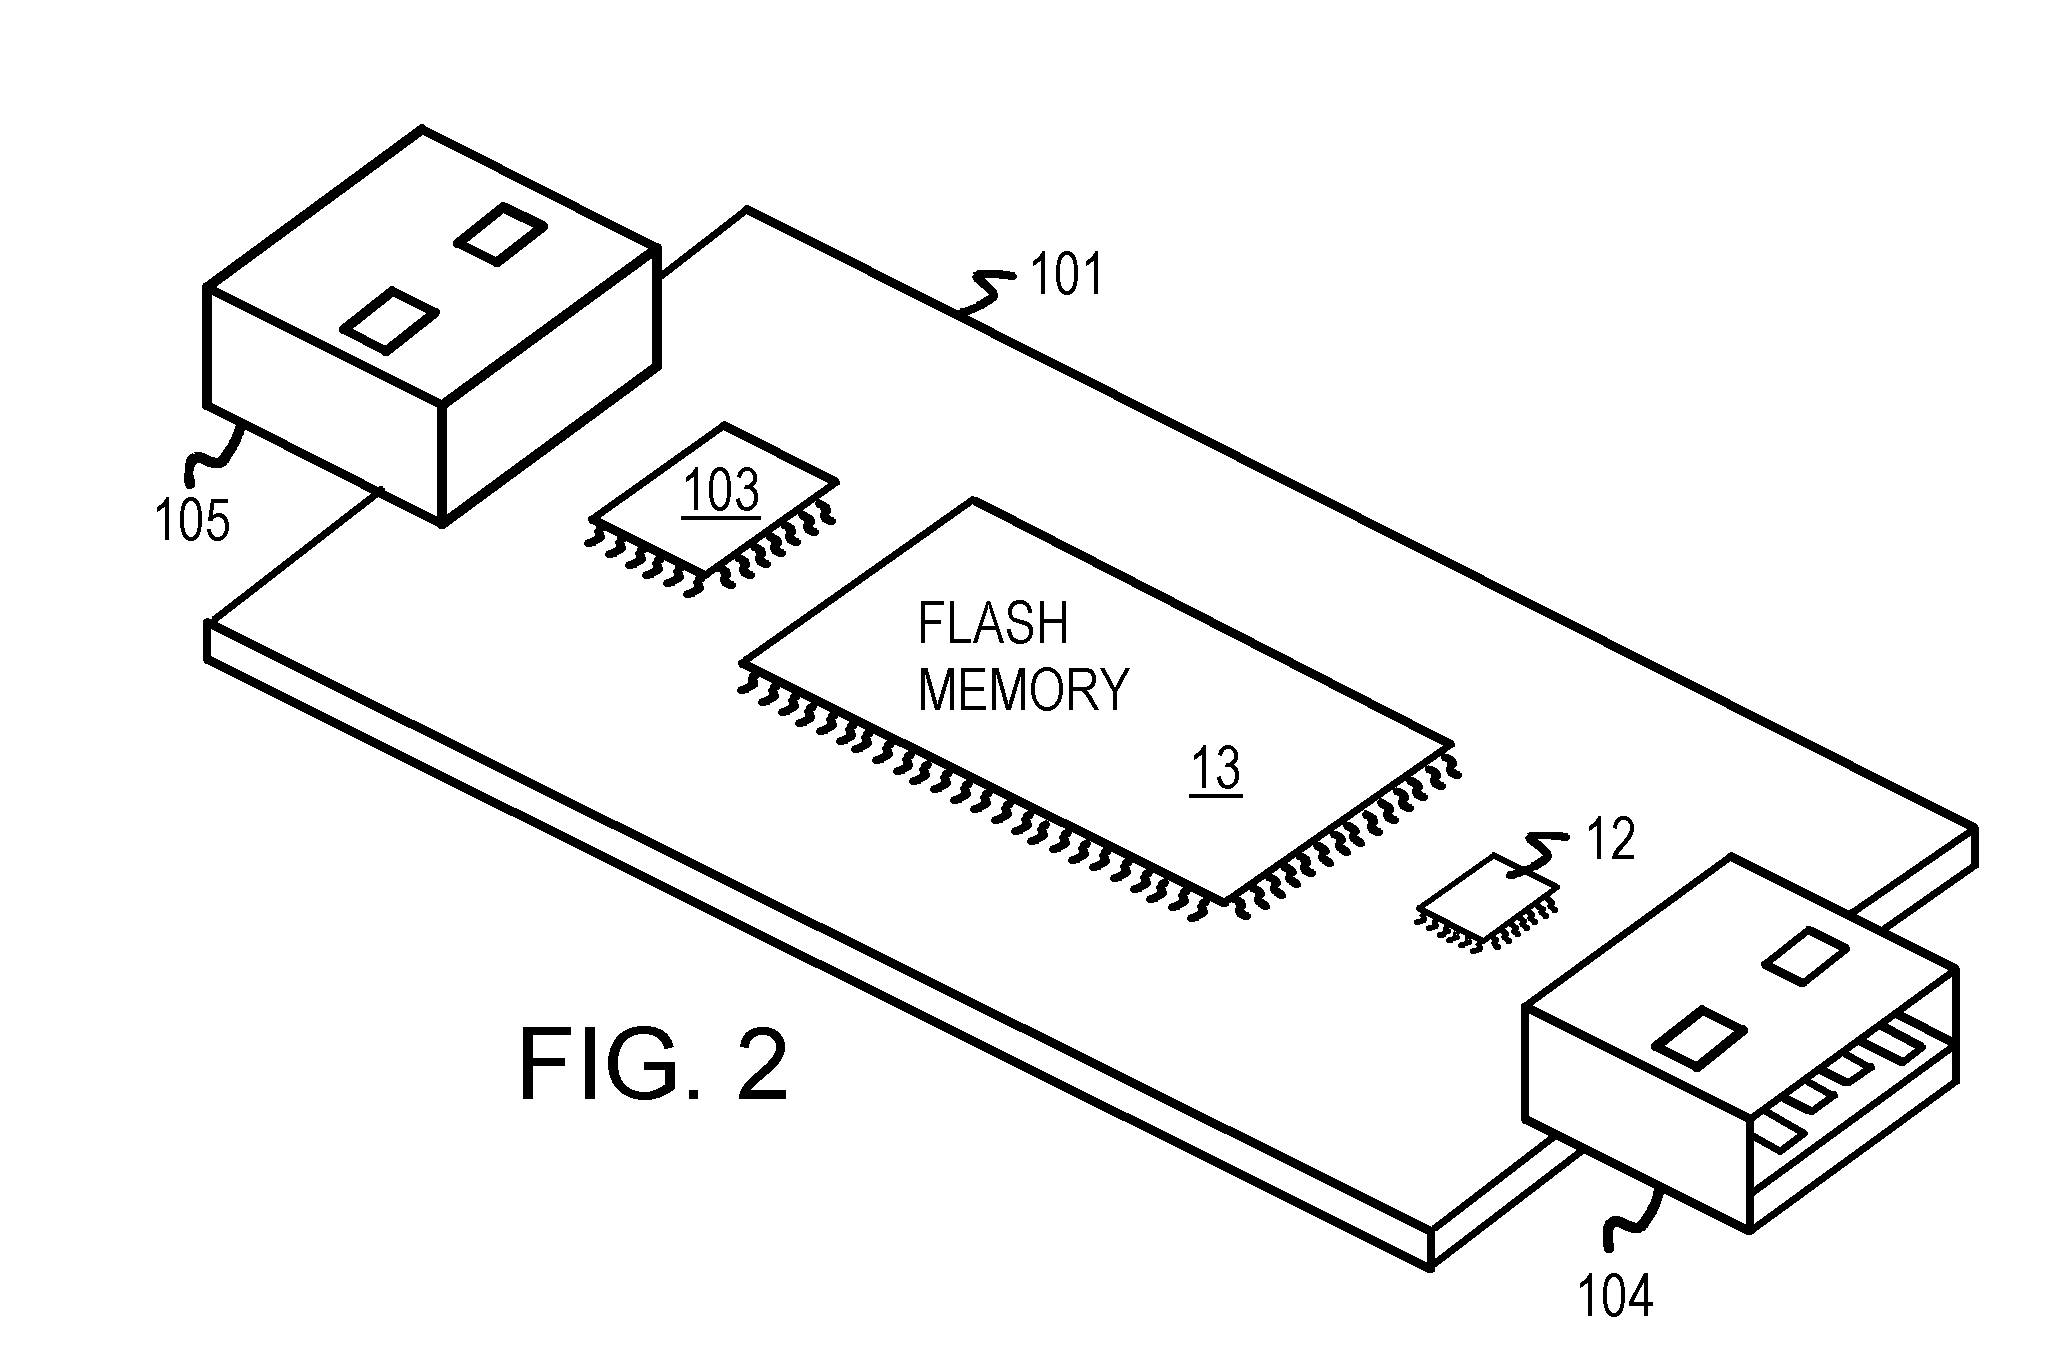 Capacity Expansion of Flash Memory Device with a Daisy-Chainable Structure and an Integrated Hub